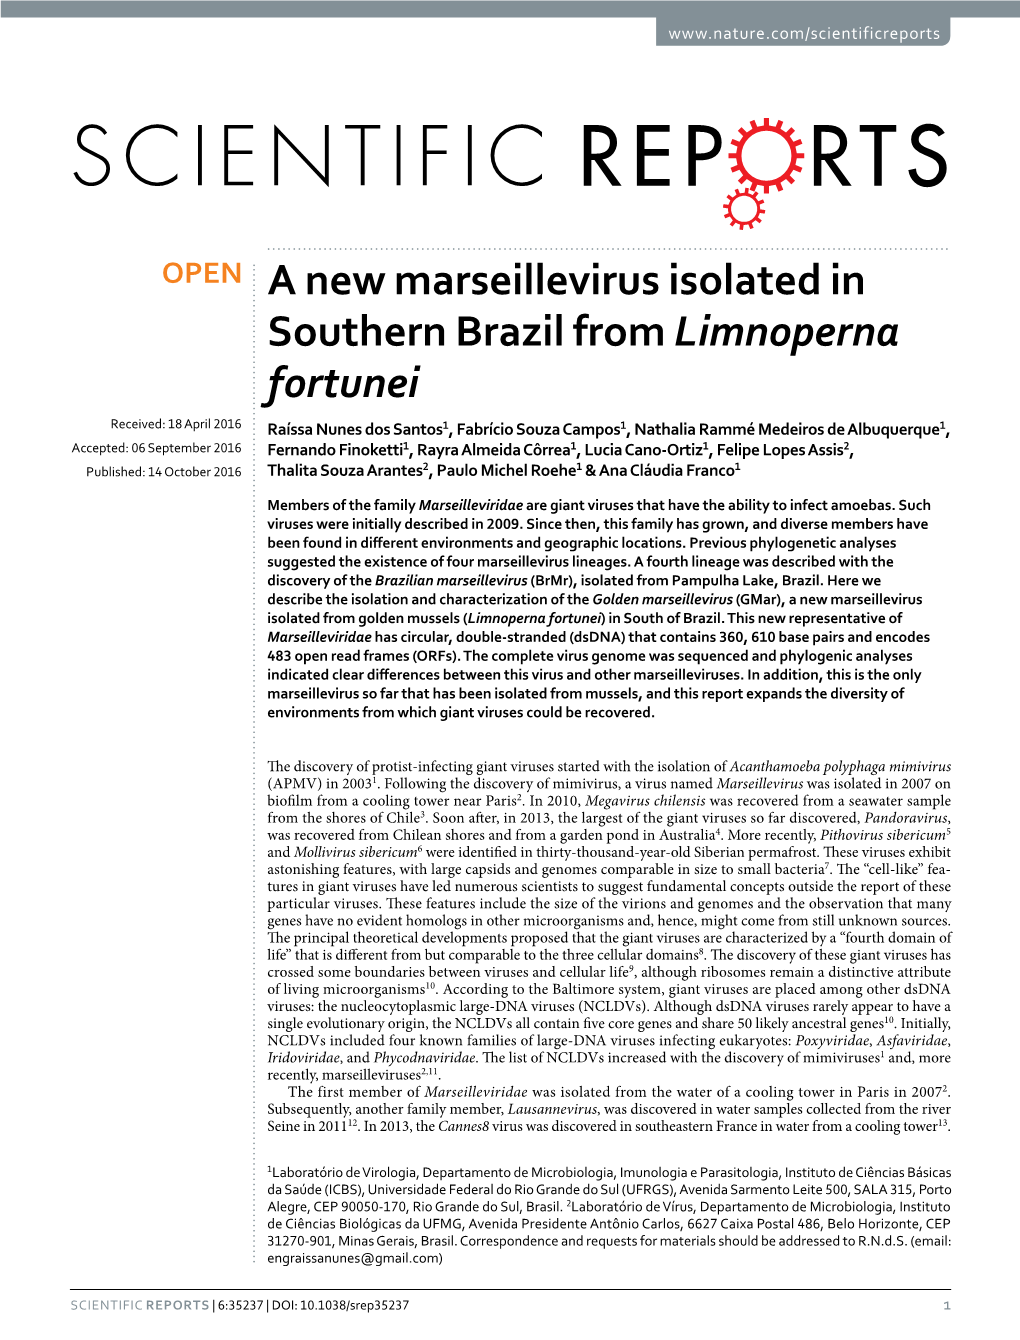 A New Marseillevirus Isolated in Southern Brazil from Limnoperna